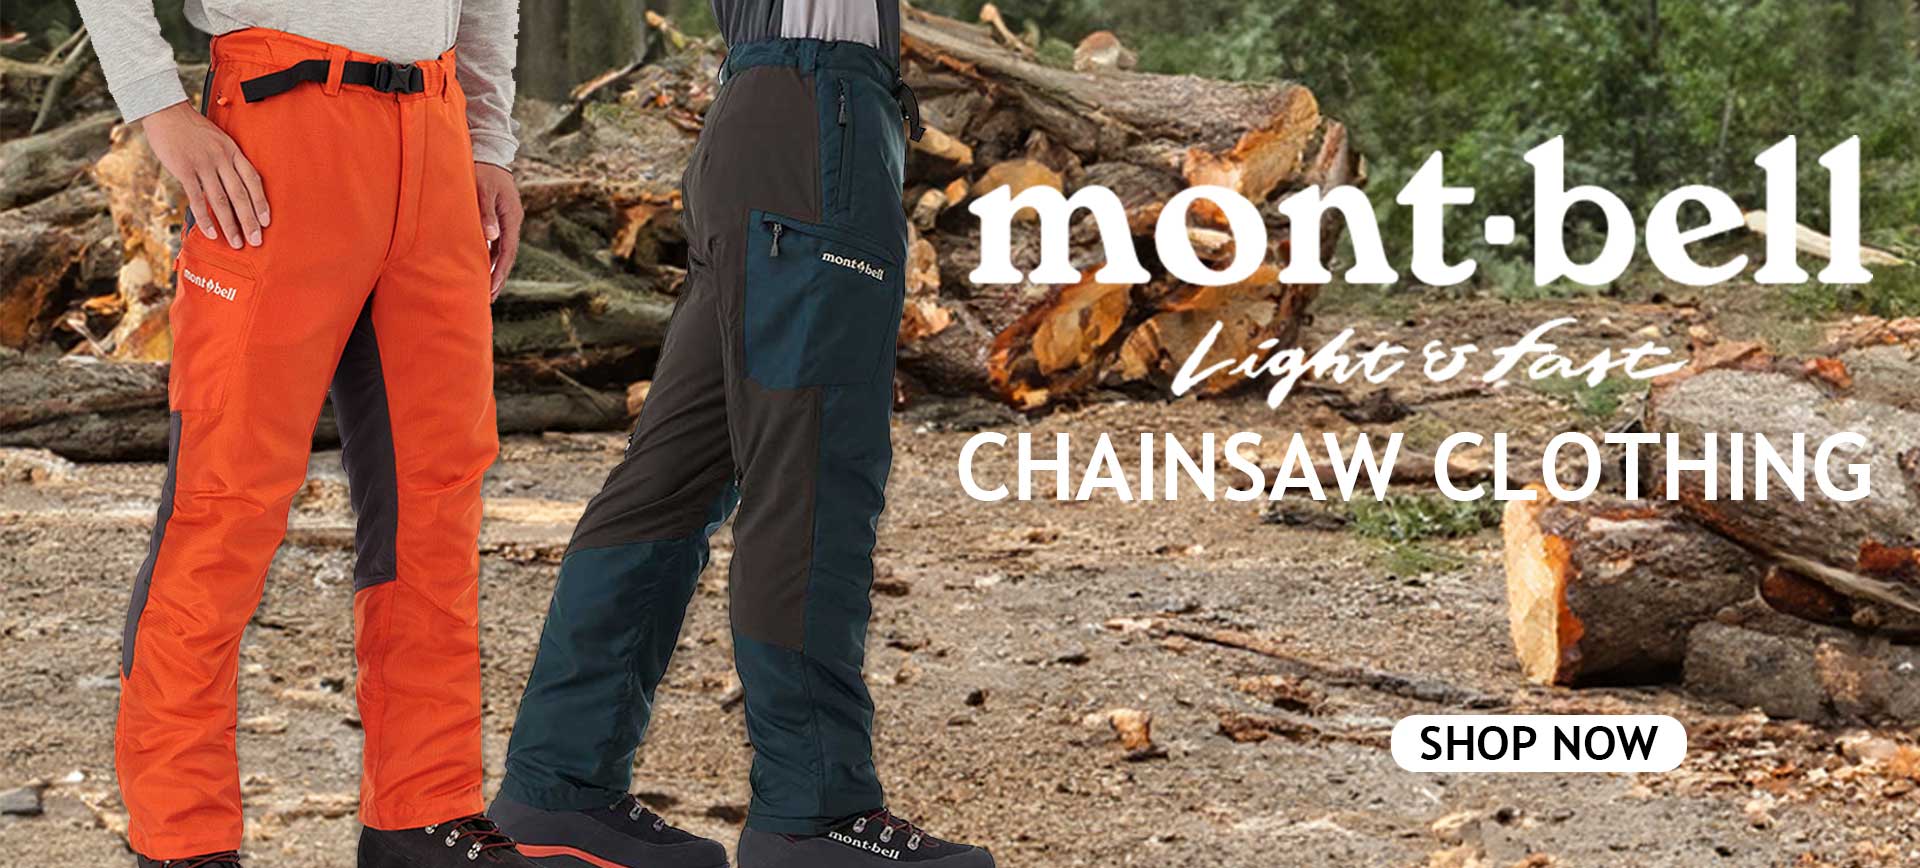 montbell chainsaw clothing